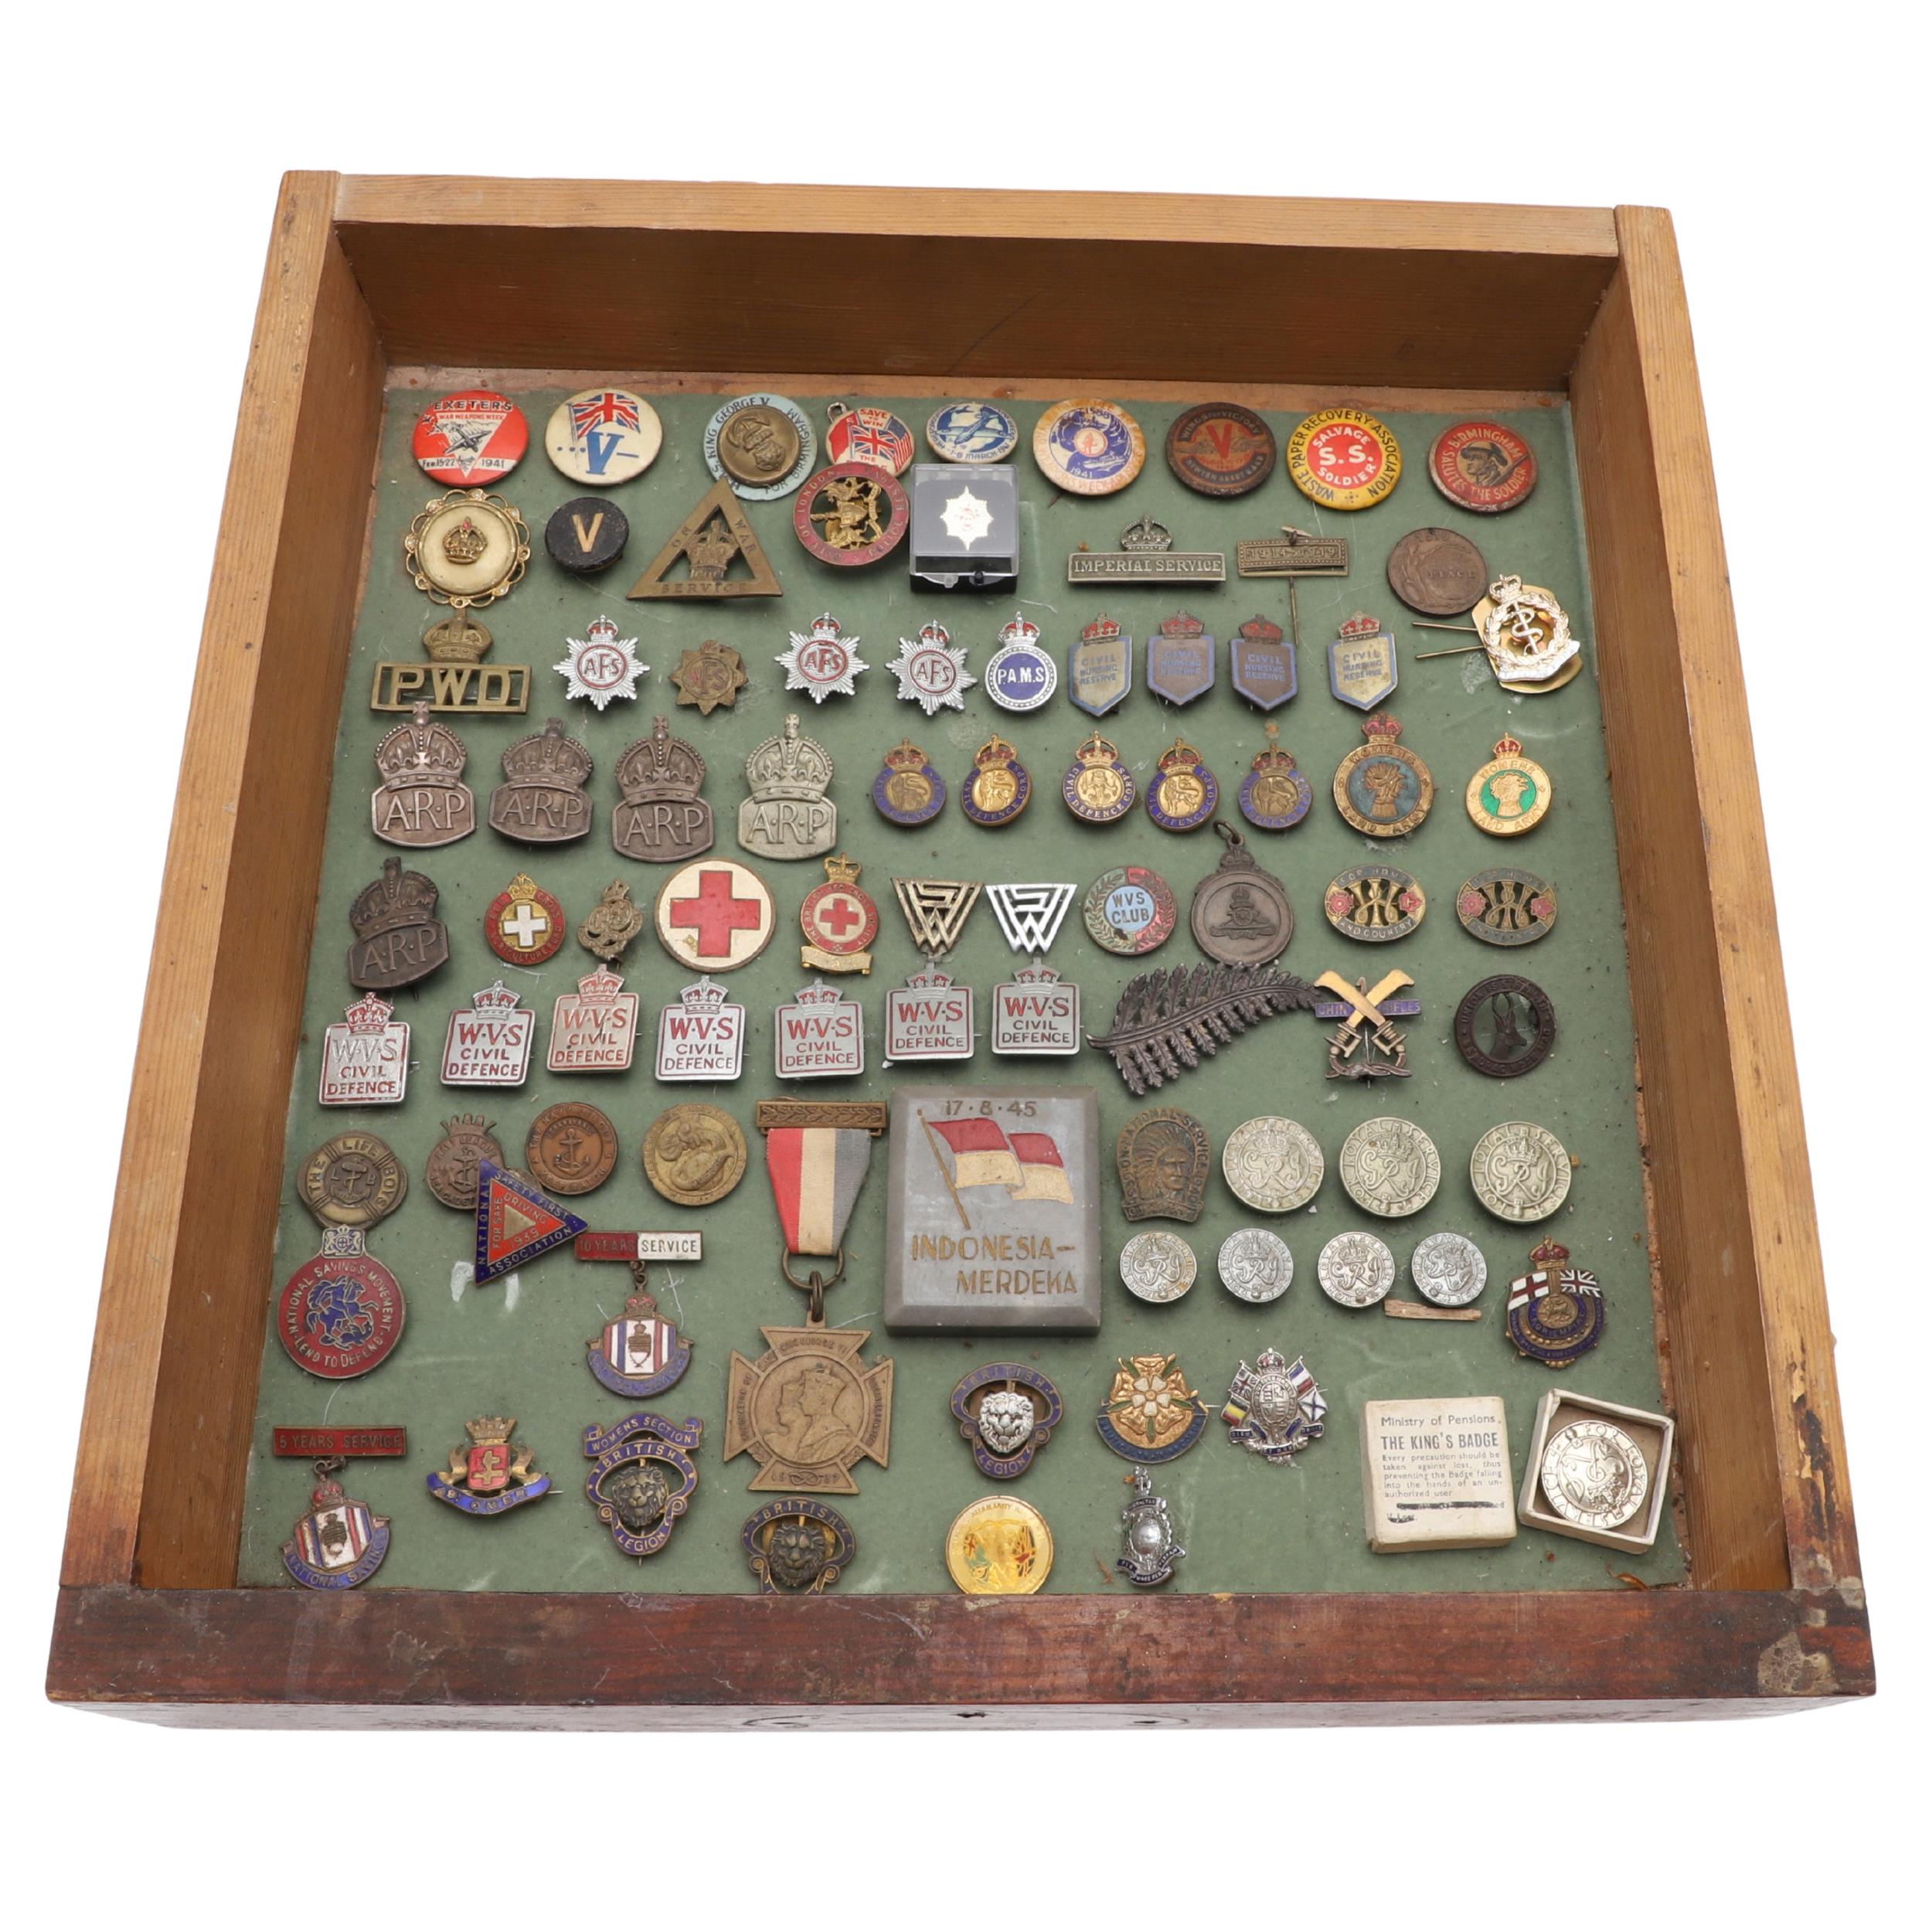 AN INTERESTING COLLECTION OF MILITARY RELATED ENAMEL AND SIMILAR BADGES.